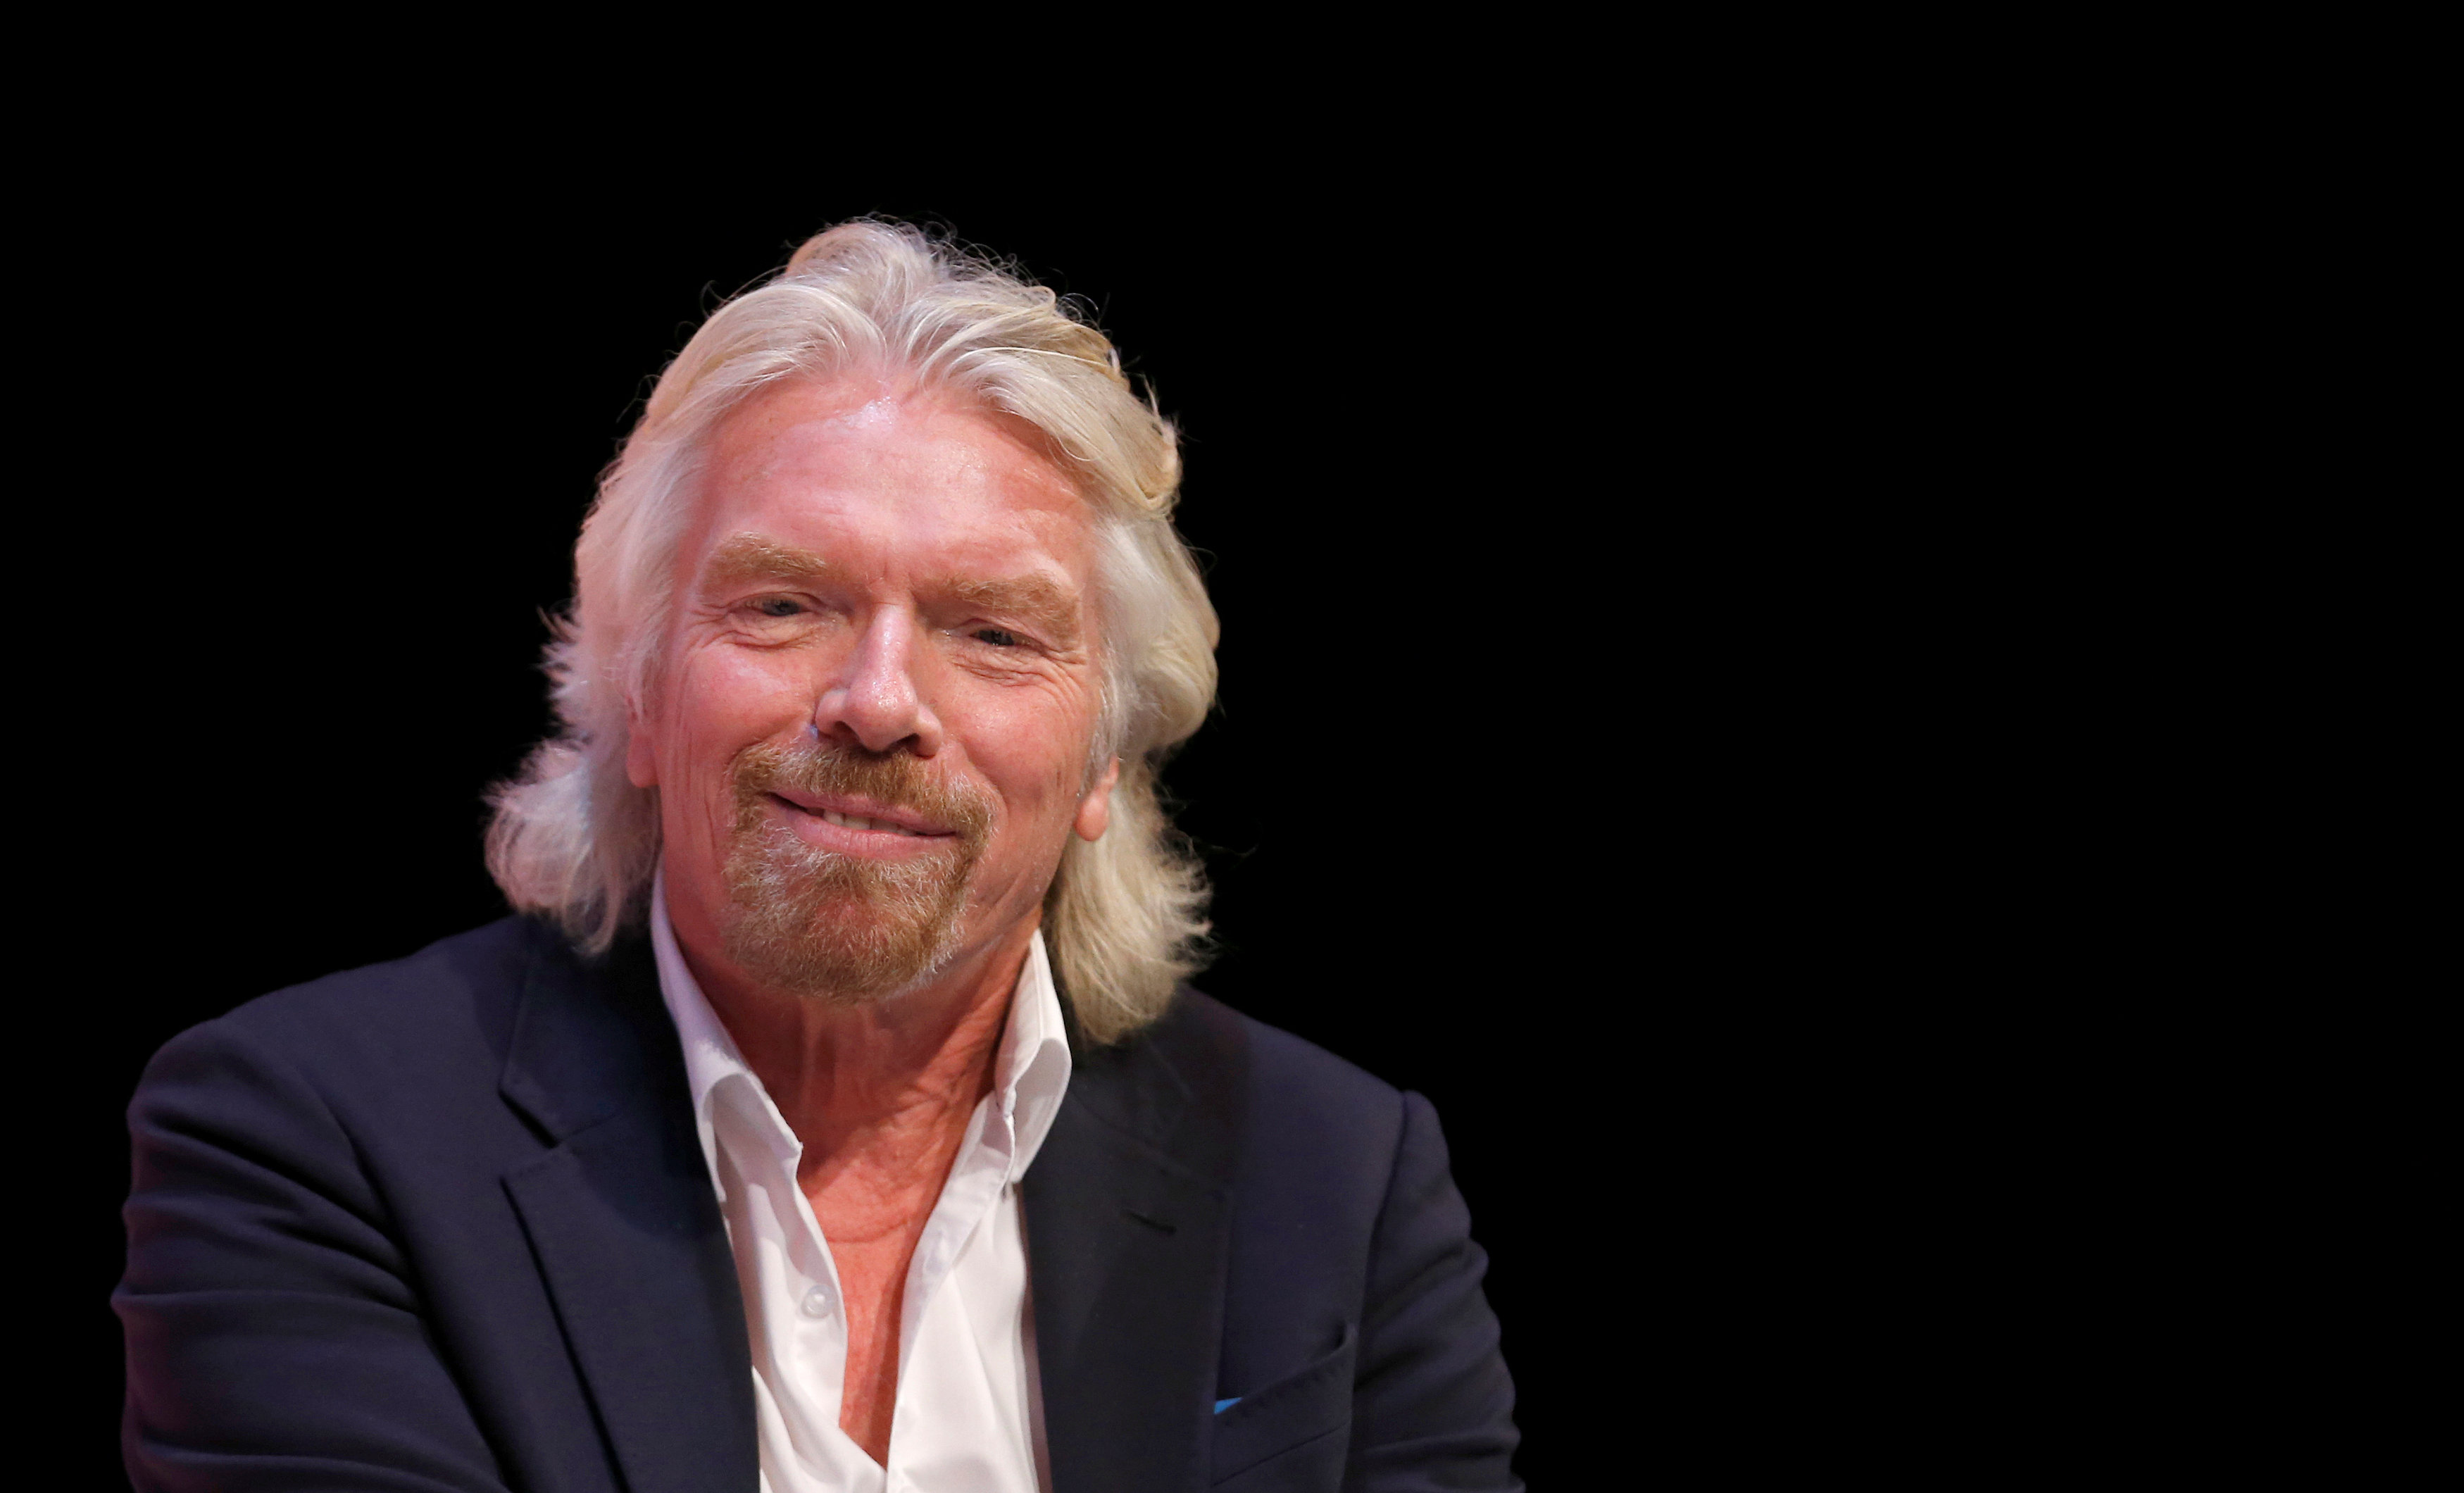 Richard Branson targeted by fraudster posing as Britain's defence minister